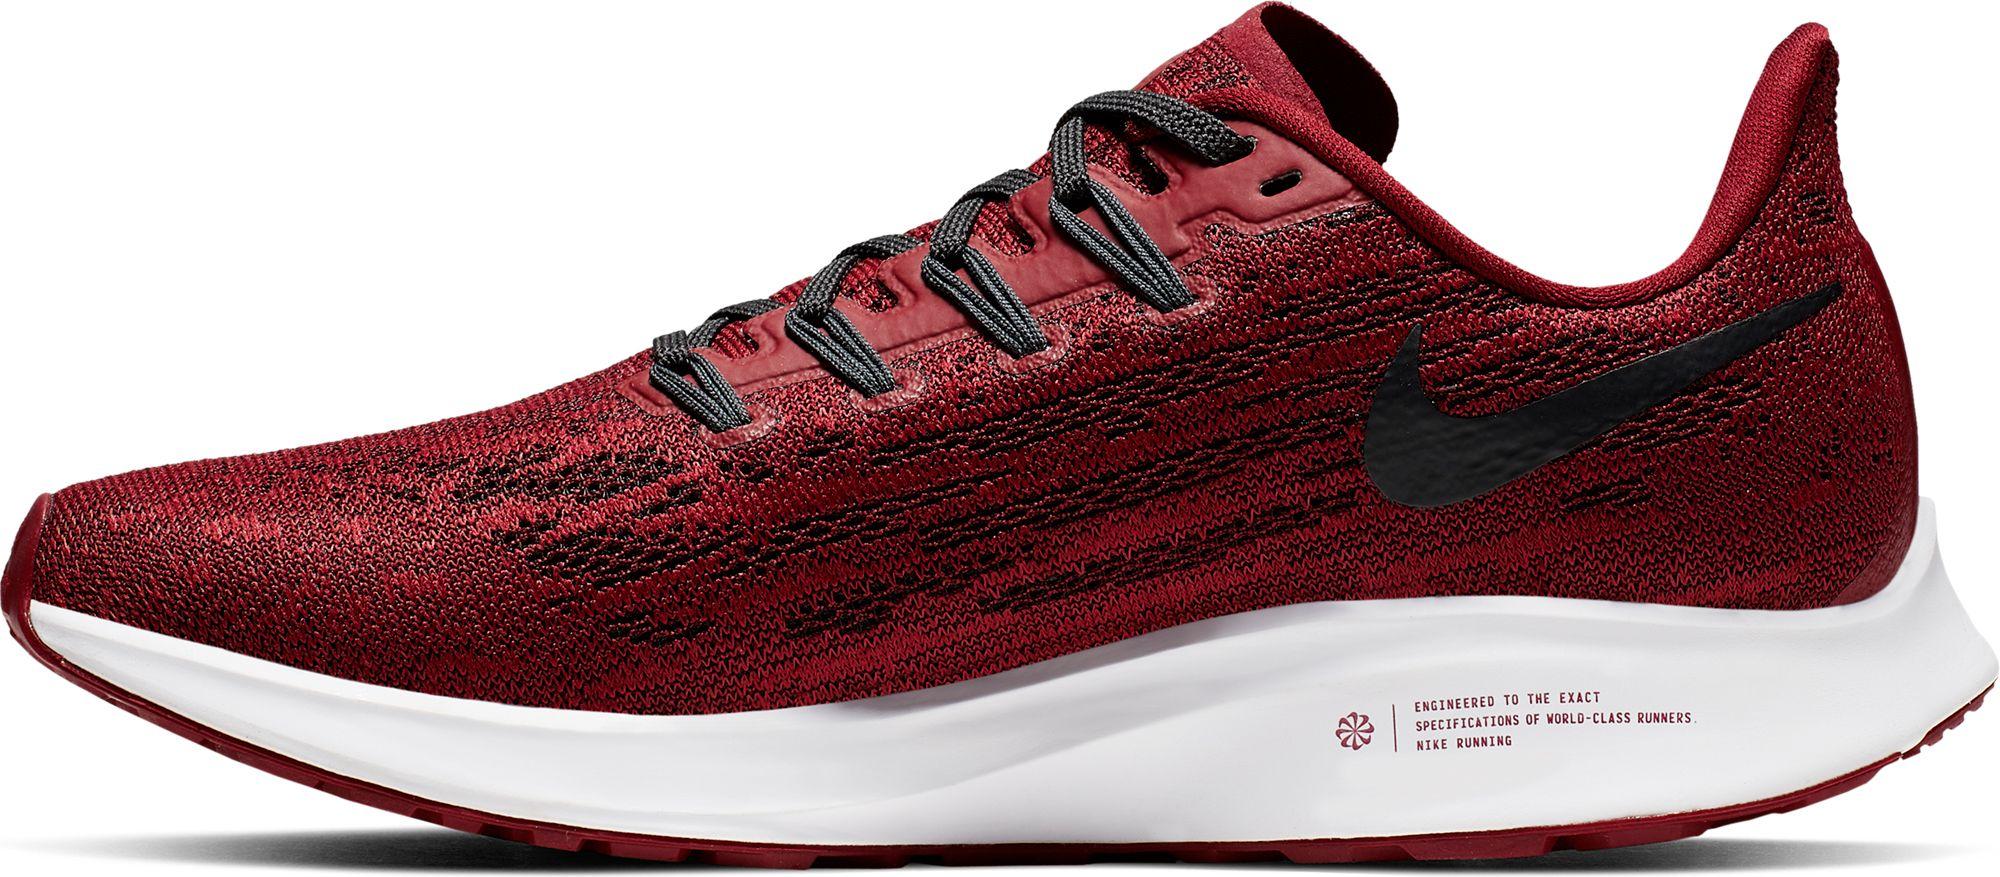 Nike Usc Air Zoom Pegasus 36 Running Shoes in Red - Lyst